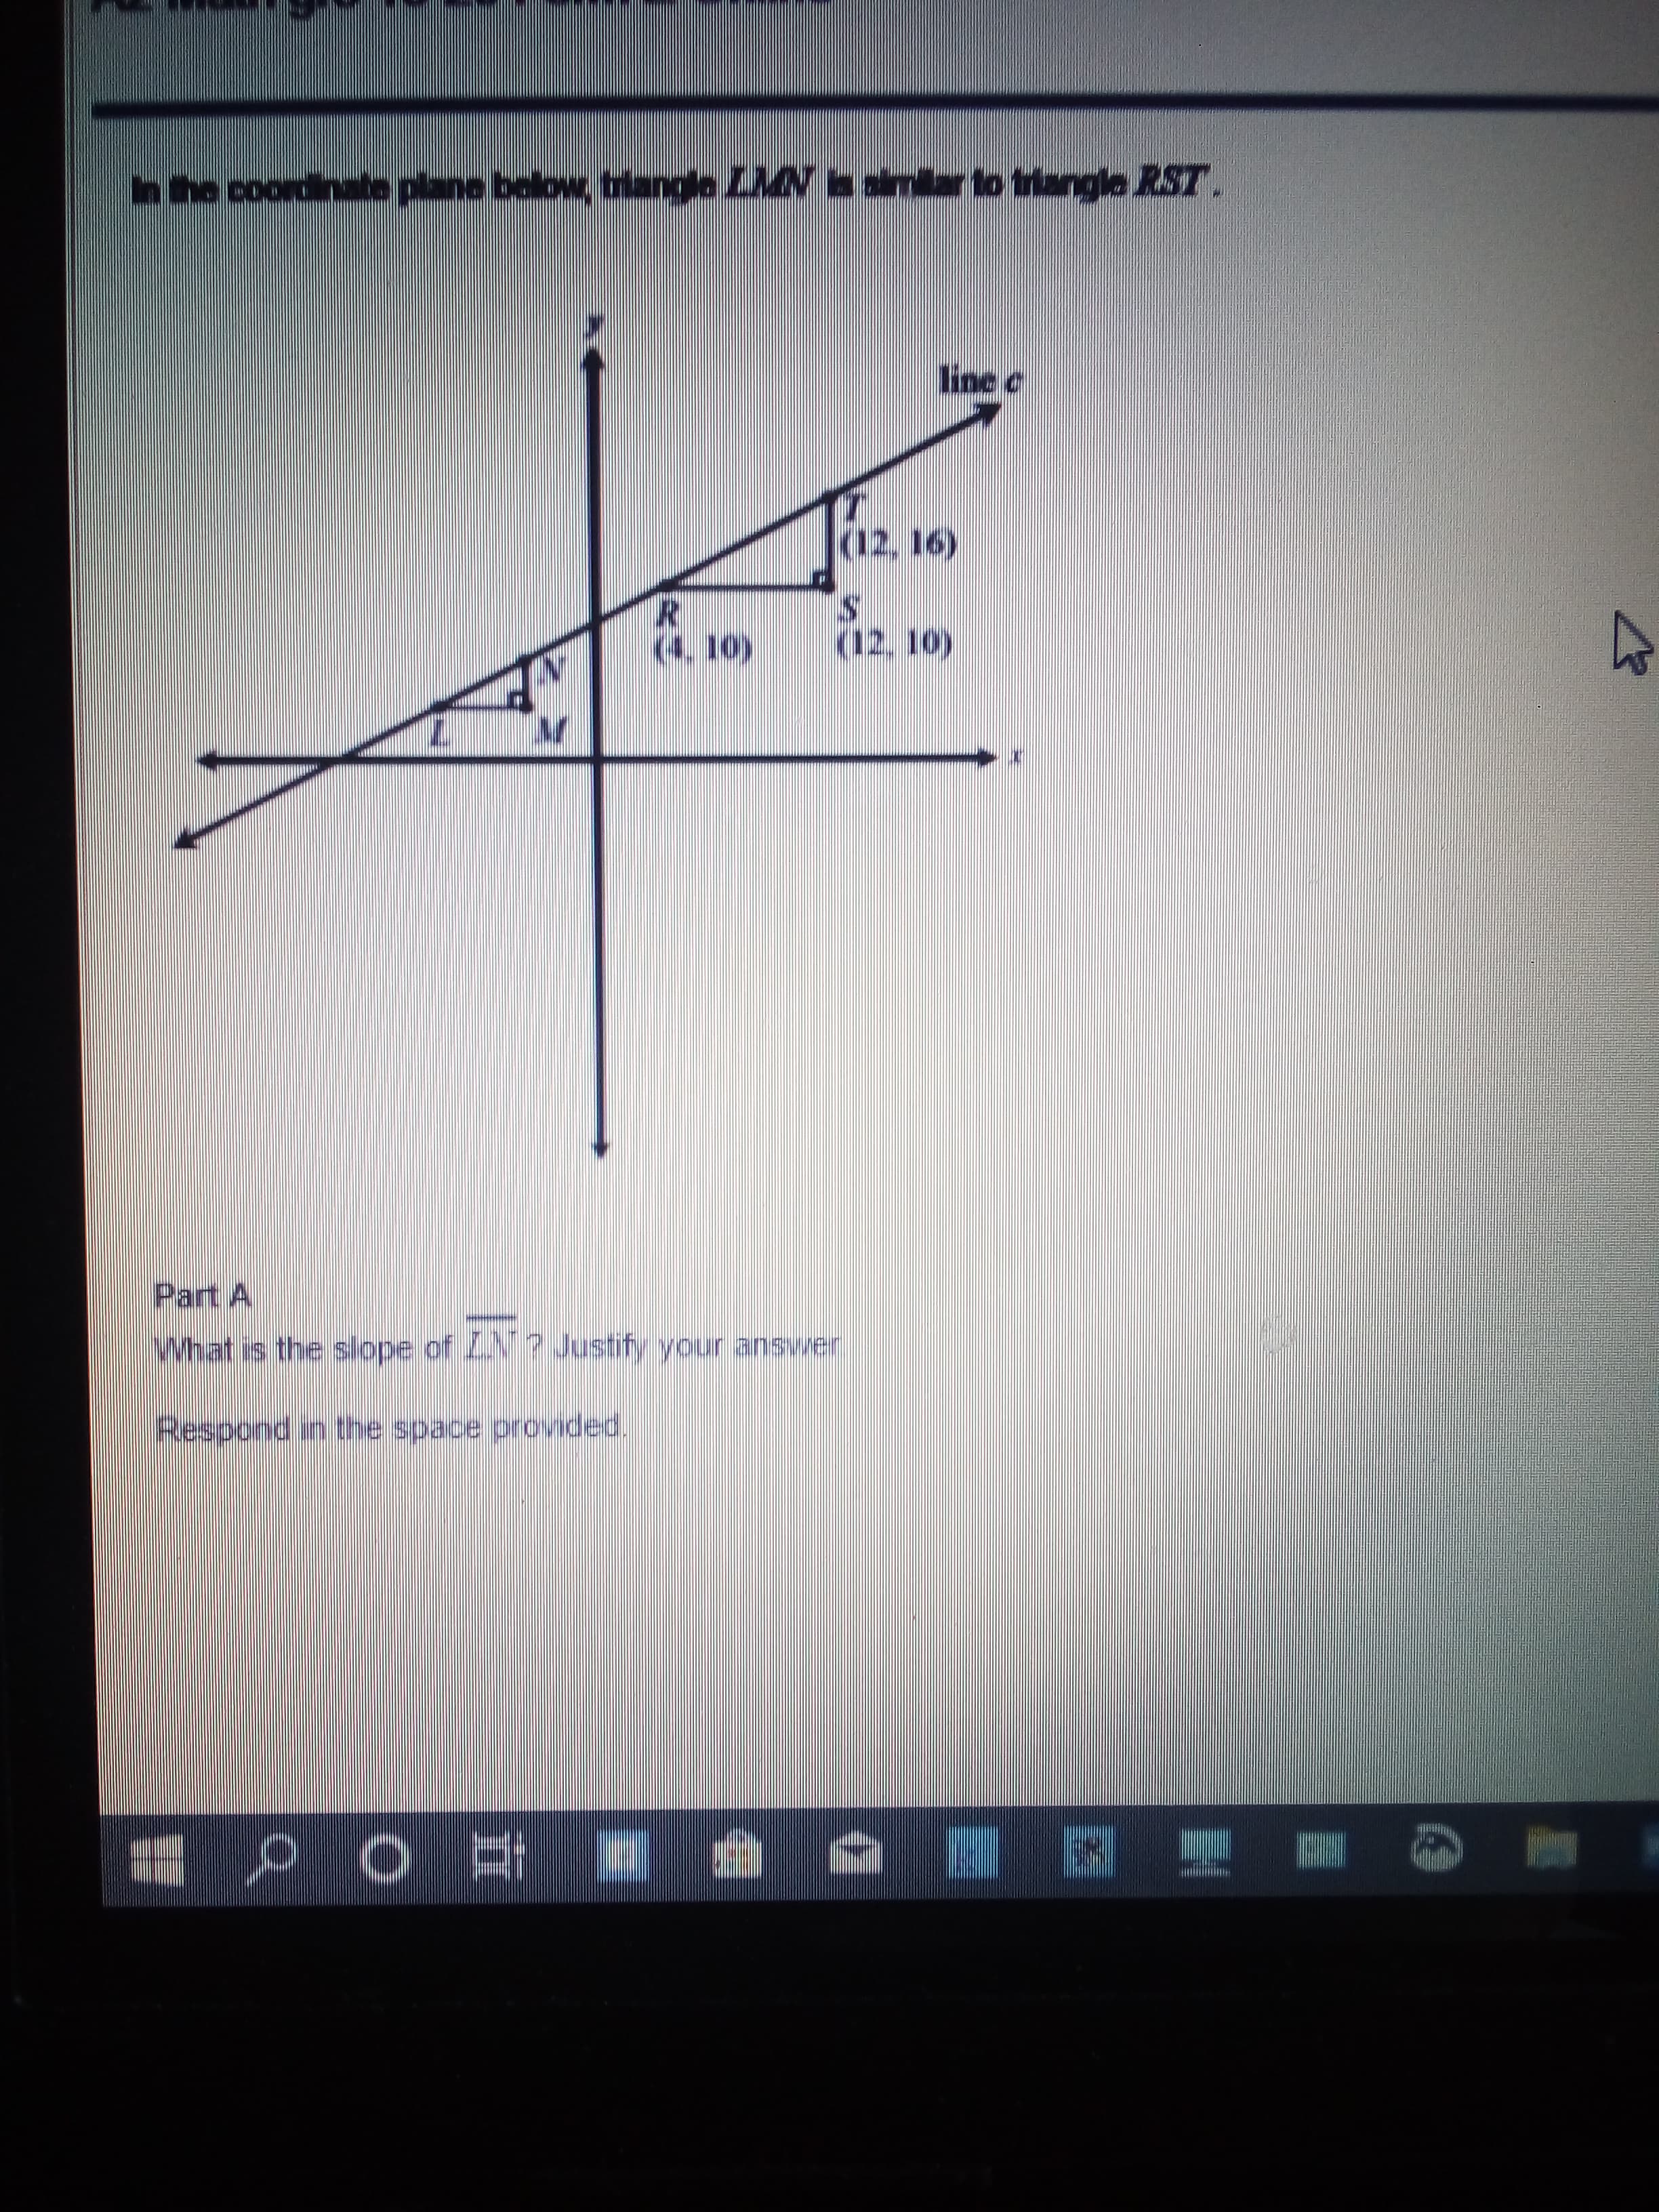 hhe coordinate plane below, triangle LAN a amar to triangle RST.
line C
(12. 16)
(12, 10)
(4. 10)
Part A
What is the slope of ZN? Justify your answer
Respond in the space provided.
